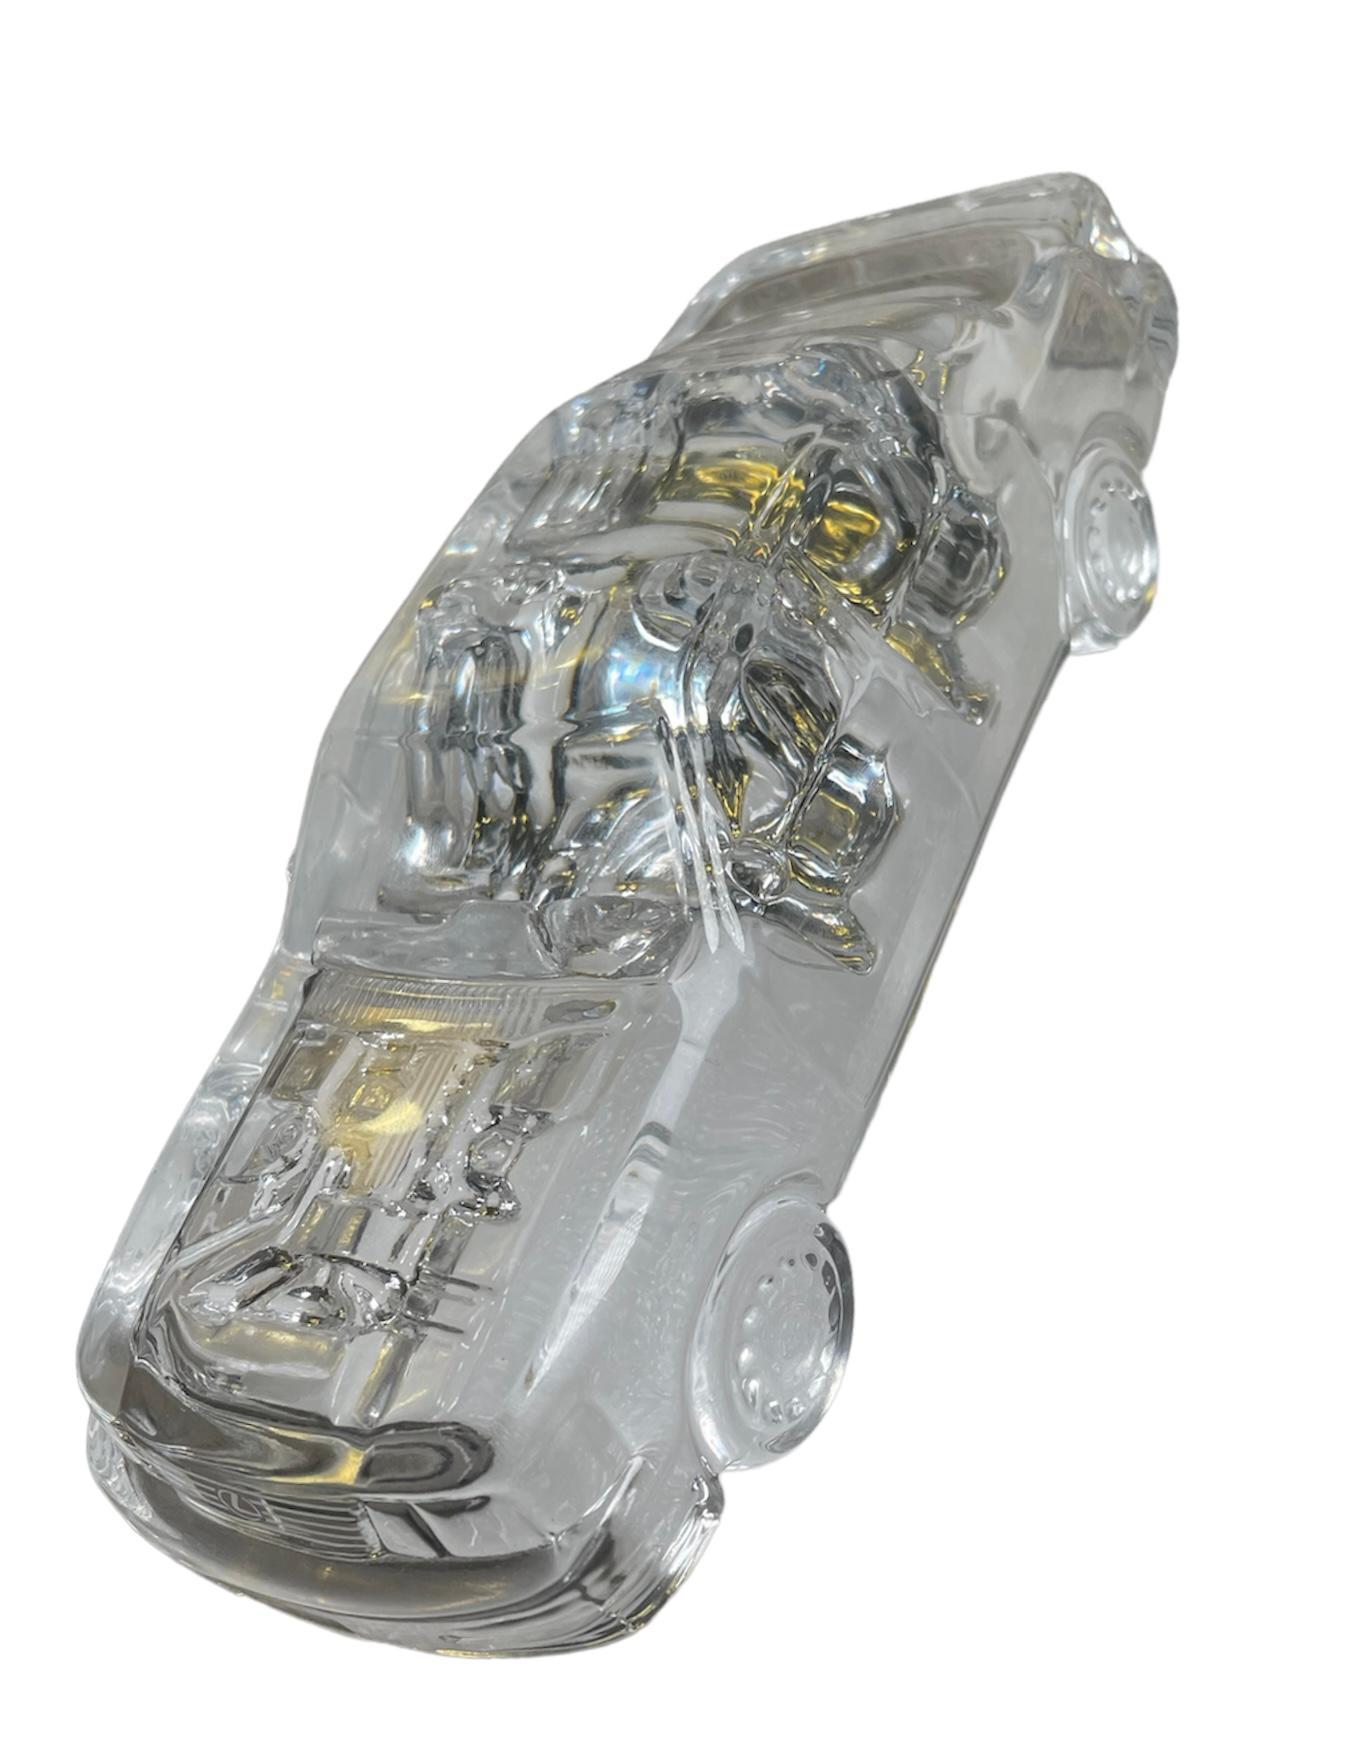 1989-90’s Clear Crystal Lexus LS 400 Car Paperweight For Sale 5